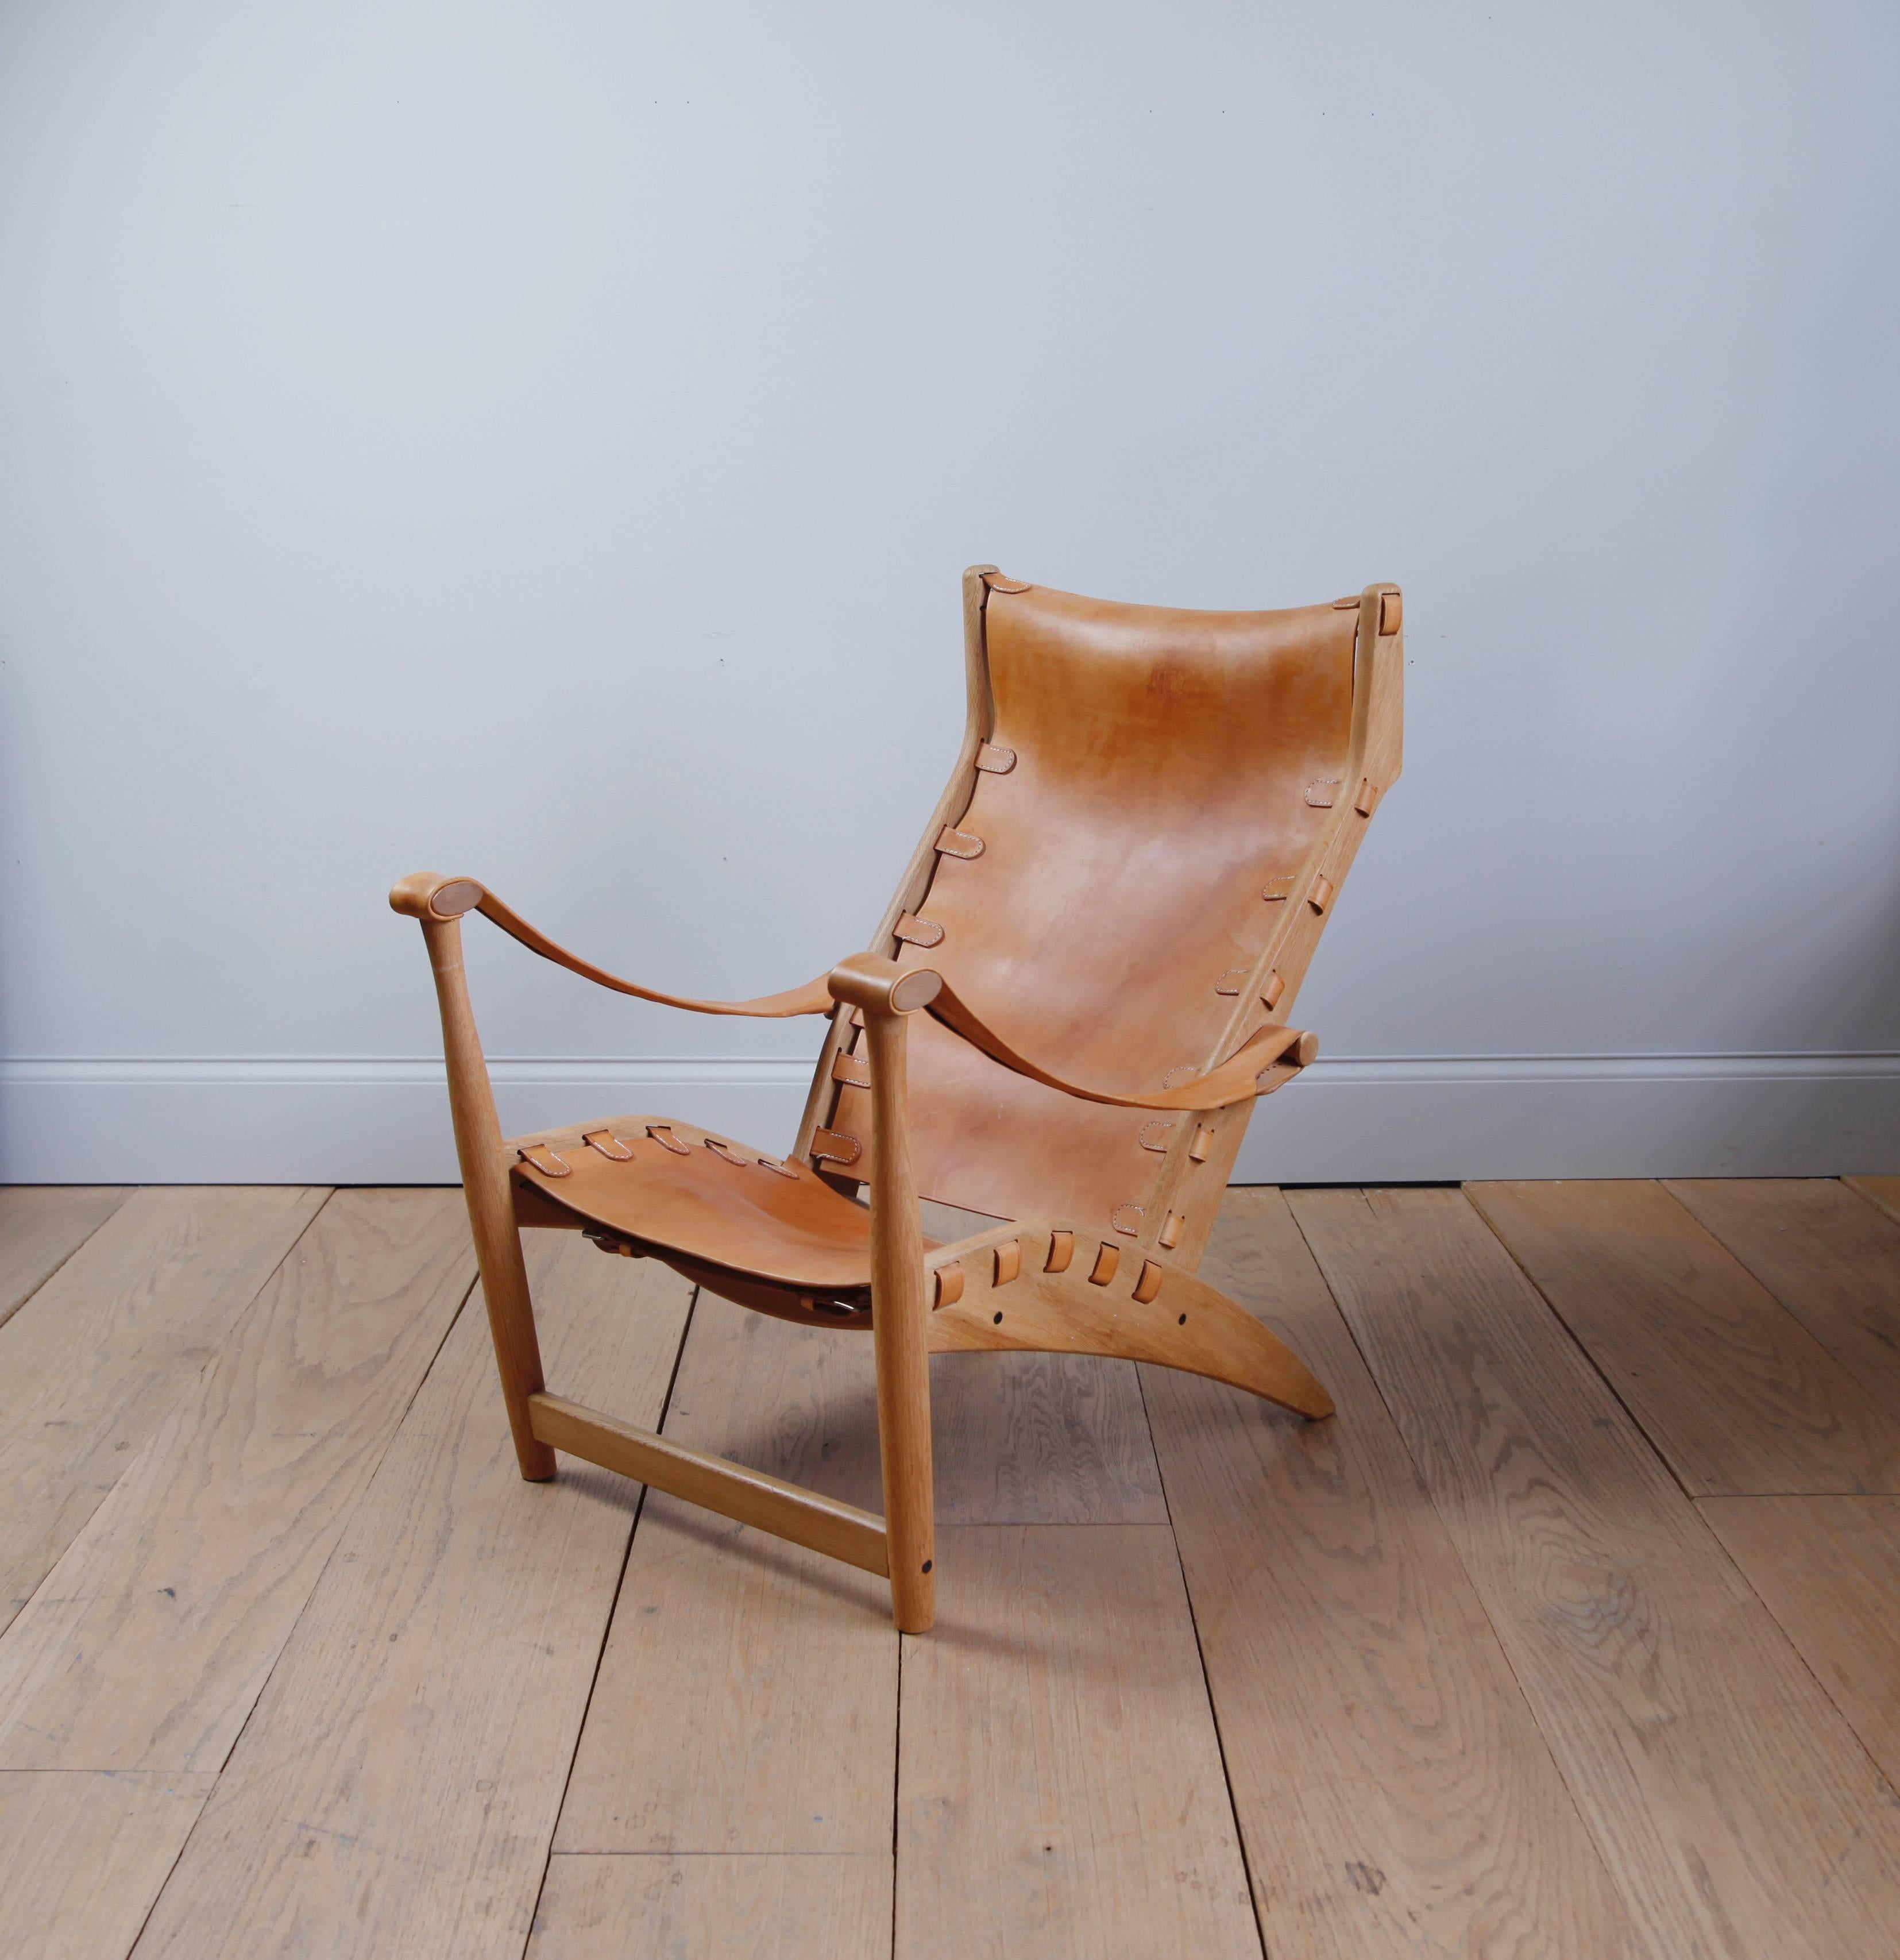 As a young man, Danish Architect Mogens Voltelen worked for both Poul Henningsen and Vilhelm Lauritzen. His Copenhagen lounge chair was designed in 1936 for cabinet-maker Niels Vodder. In its first iteration, the leather was attached to the wood